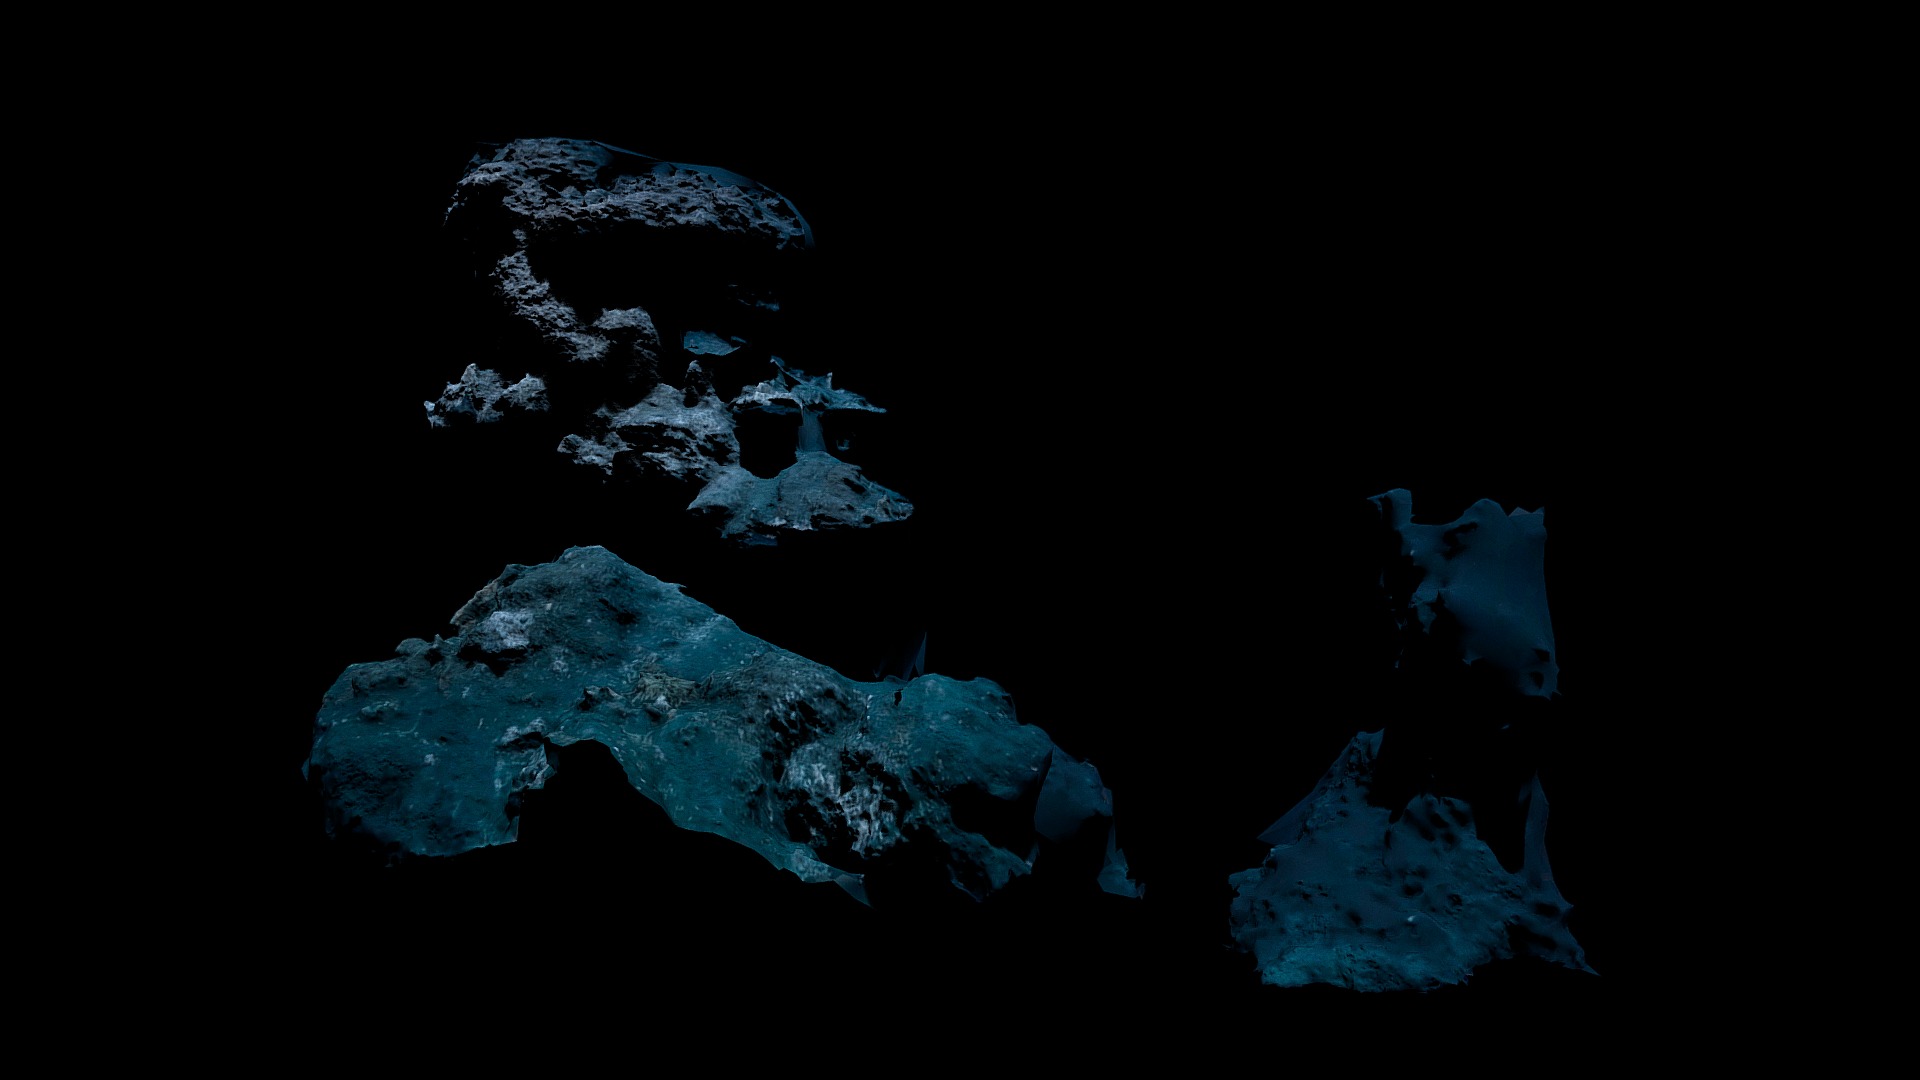 3D model Low Poly Deep Sea Hydrothermal Vent #3 - This is a 3D model of the Low Poly Deep Sea Hydrothermal Vent #3. The 3D model is about a close-up of some ice.